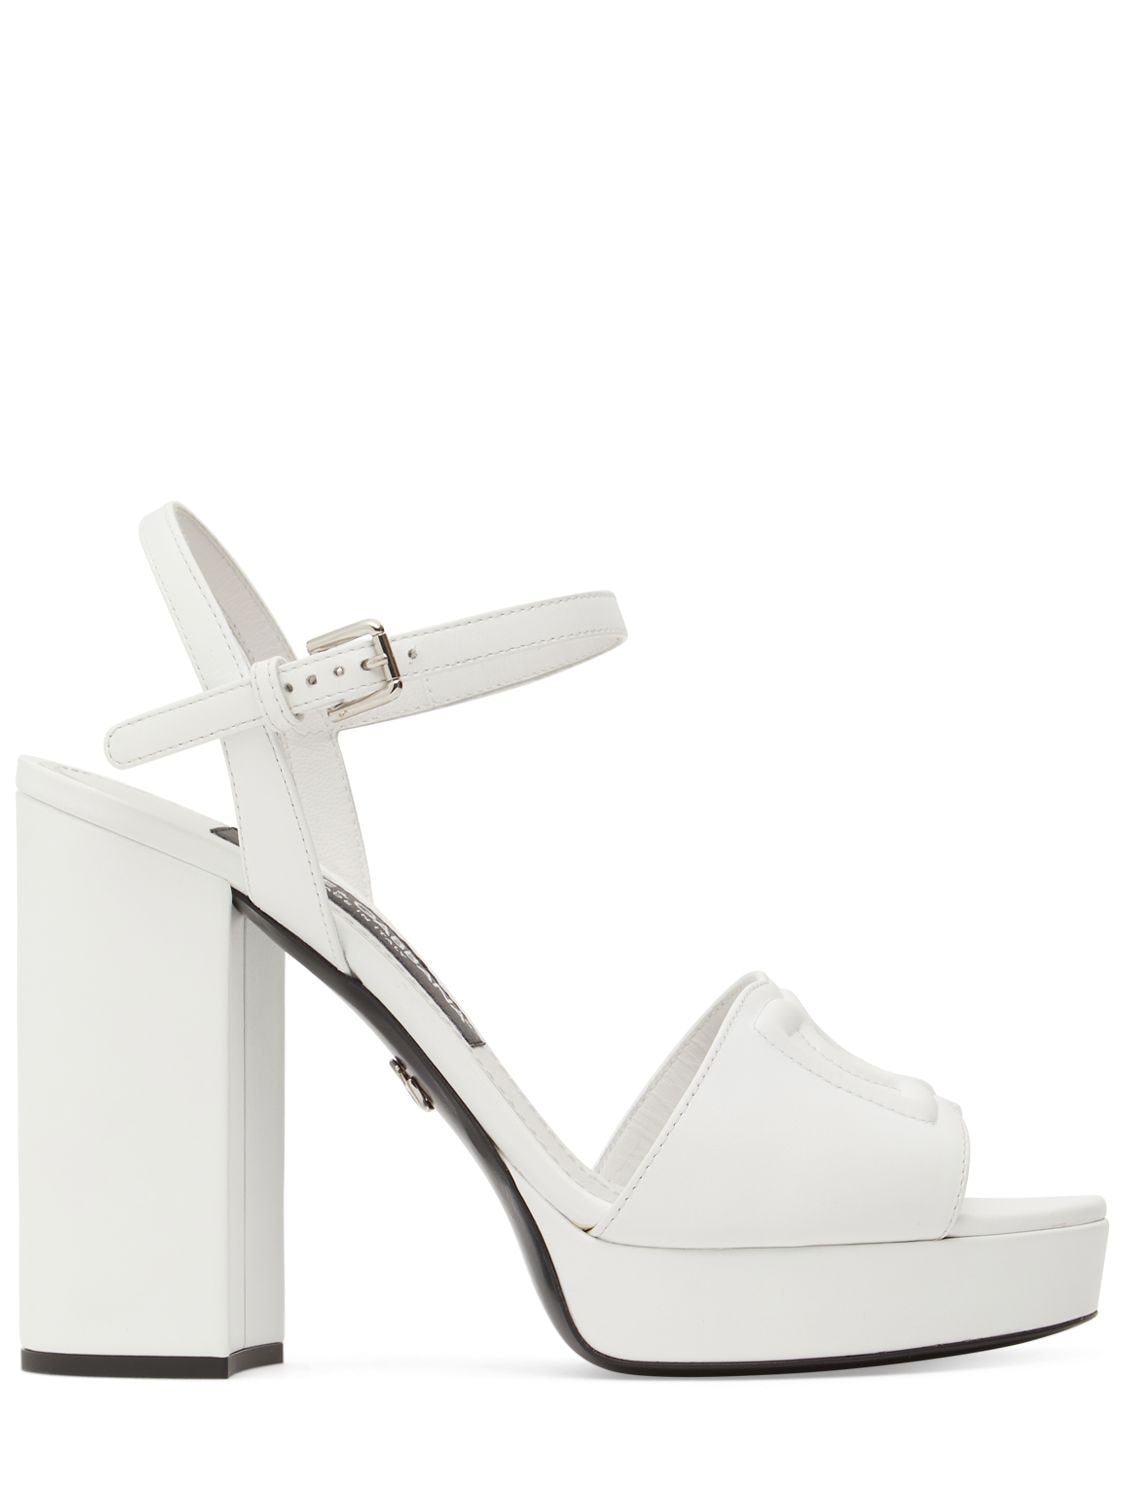 Shop Dolce & Gabbana 85mm Keira Leather High Heel Sandals In Off White